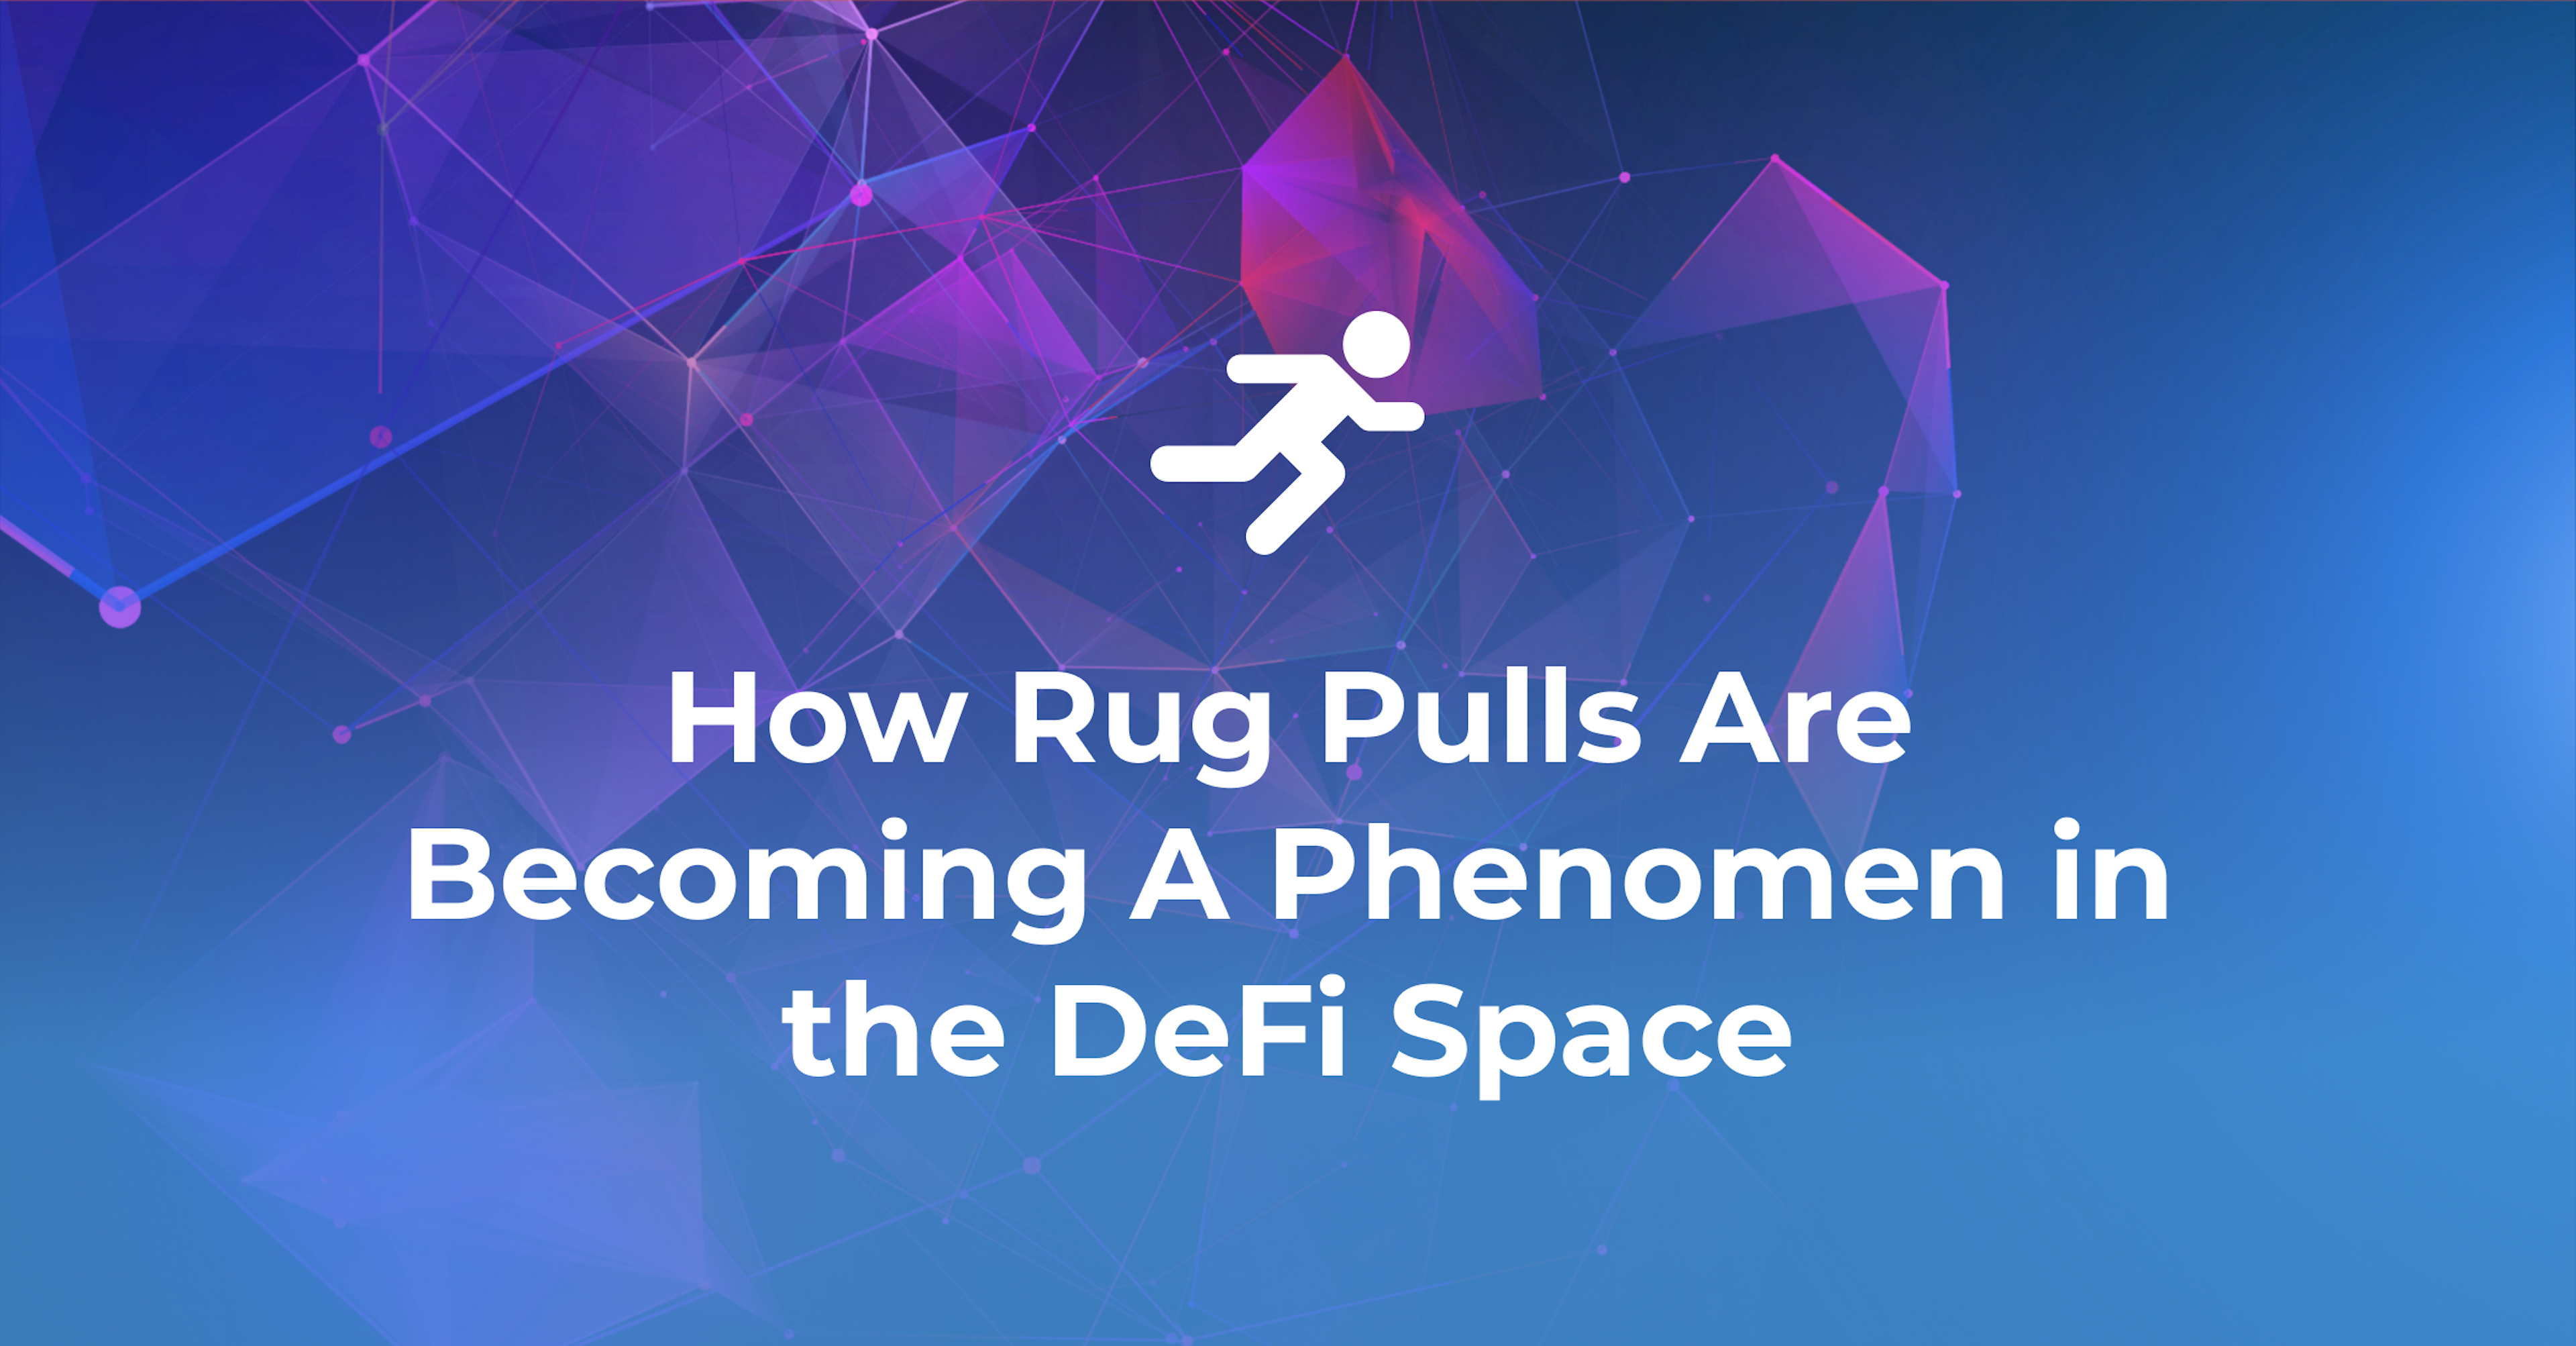 How Rug Pulls Are Becoming A Phenomen in the DeFi Space